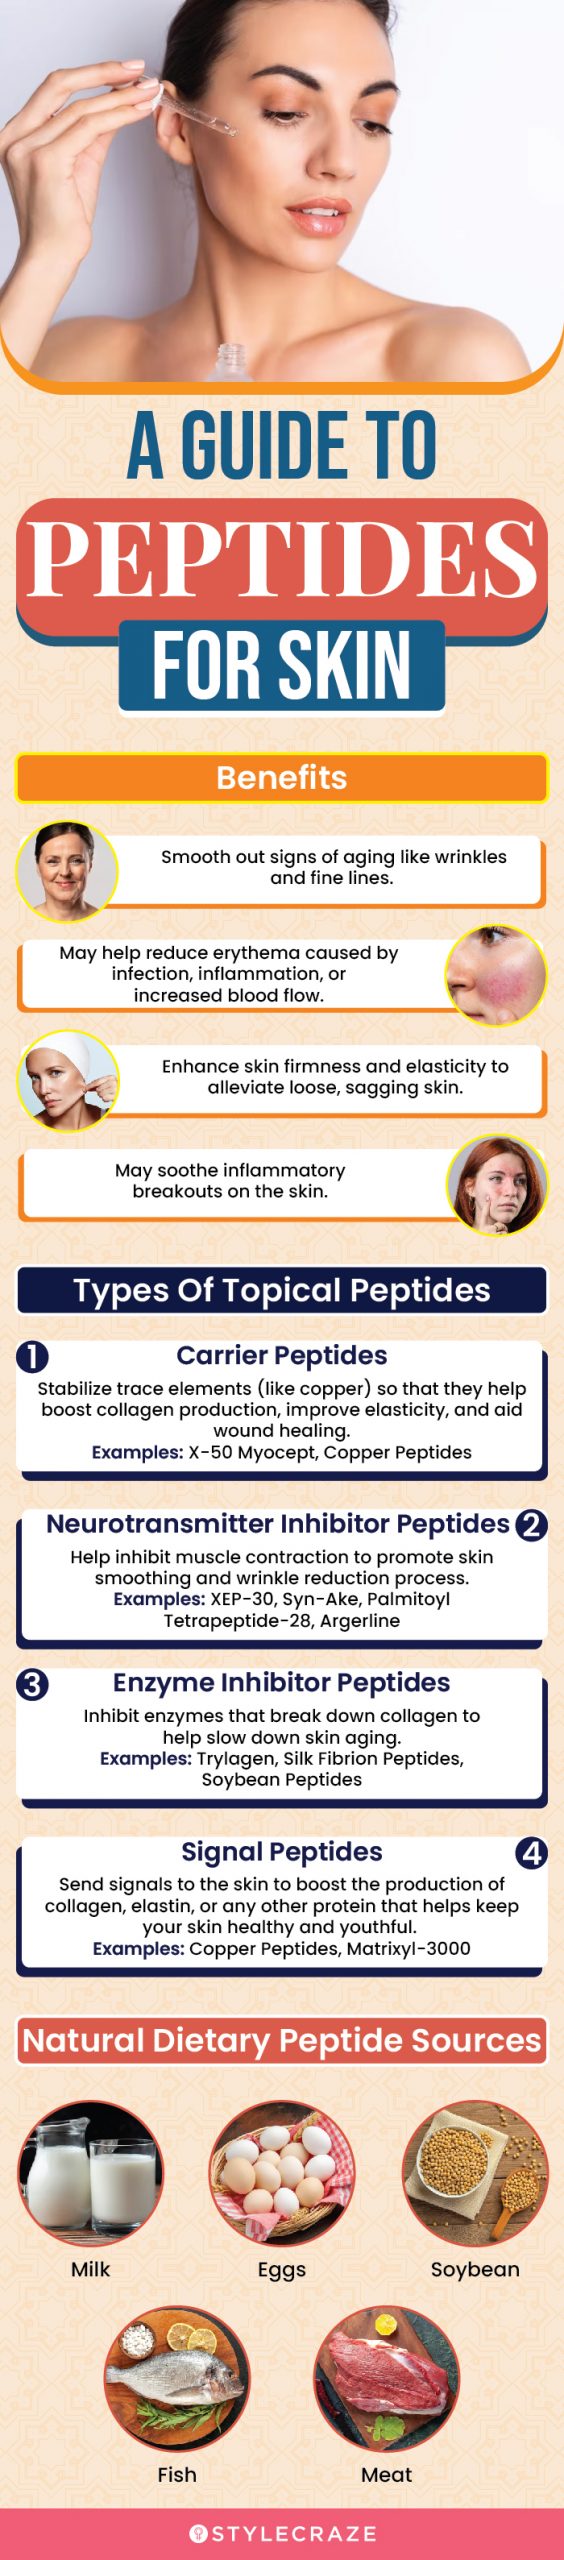 a guide to peptides for skin (infographic)